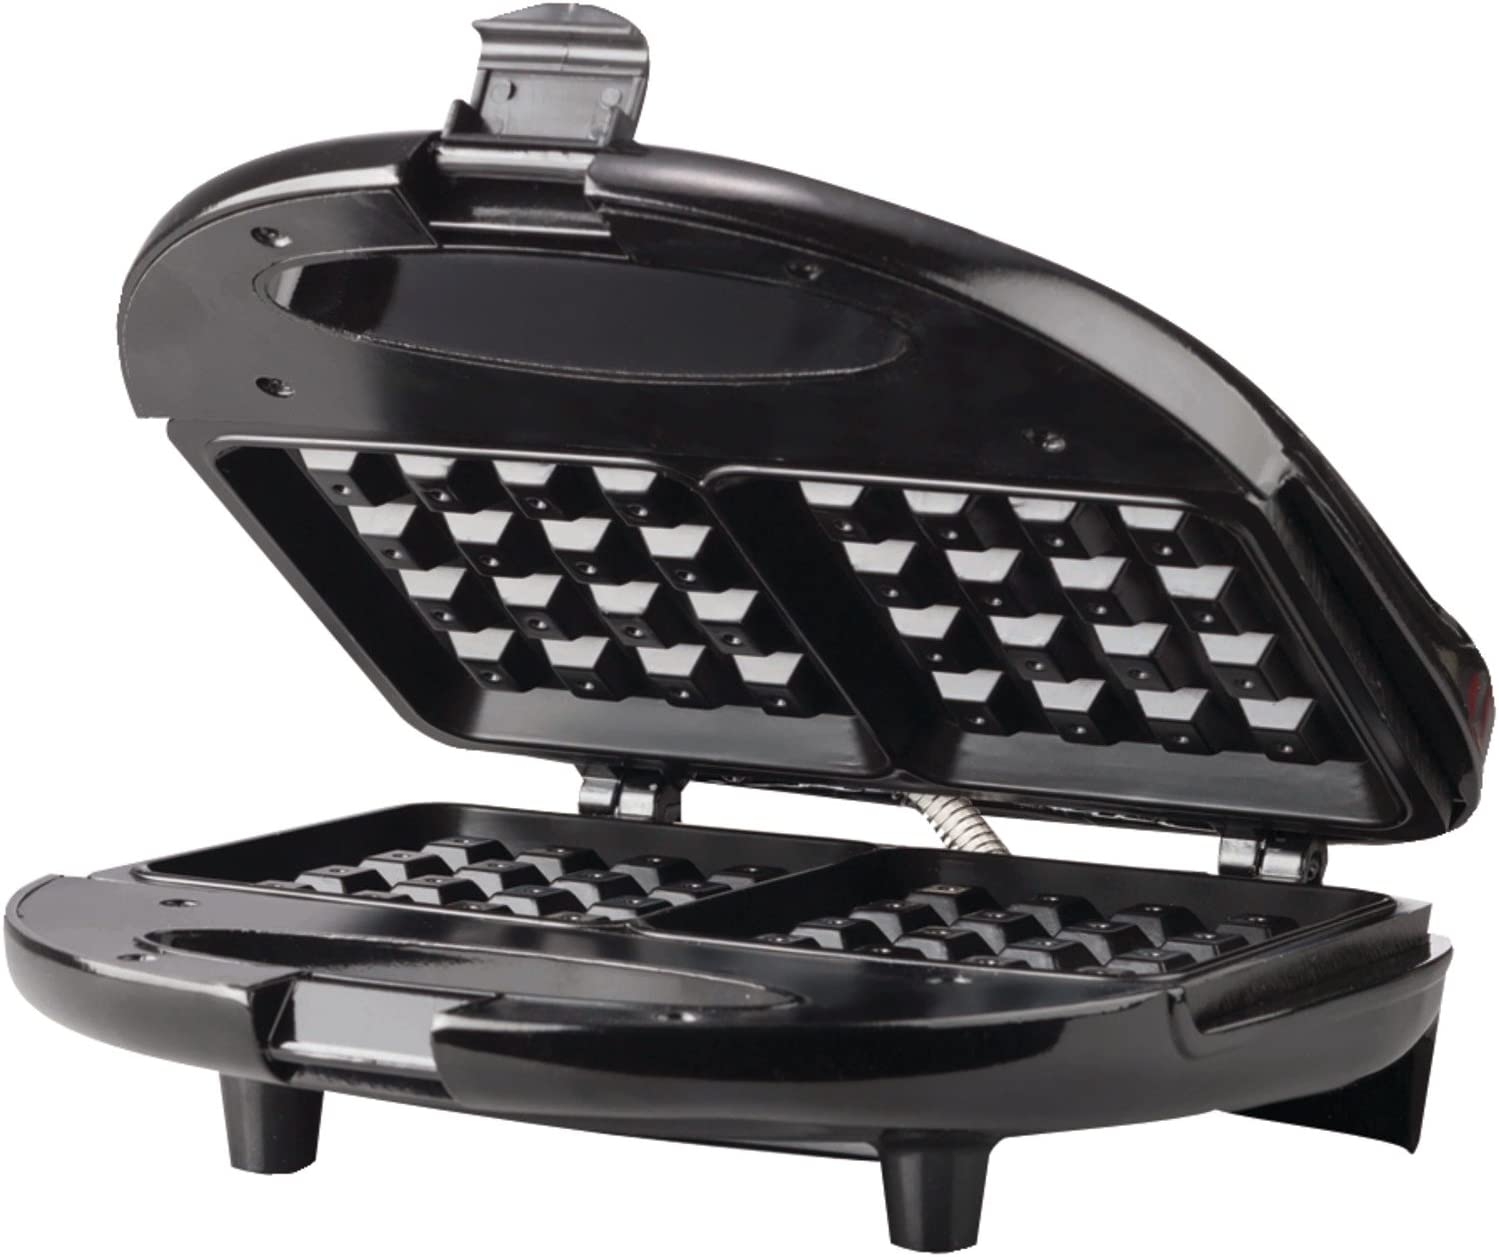 Brentwood TS-243 Non-Stick Dual Waffle Maker, Black Import To Shop ×Product customization General Description Gallery Reviews